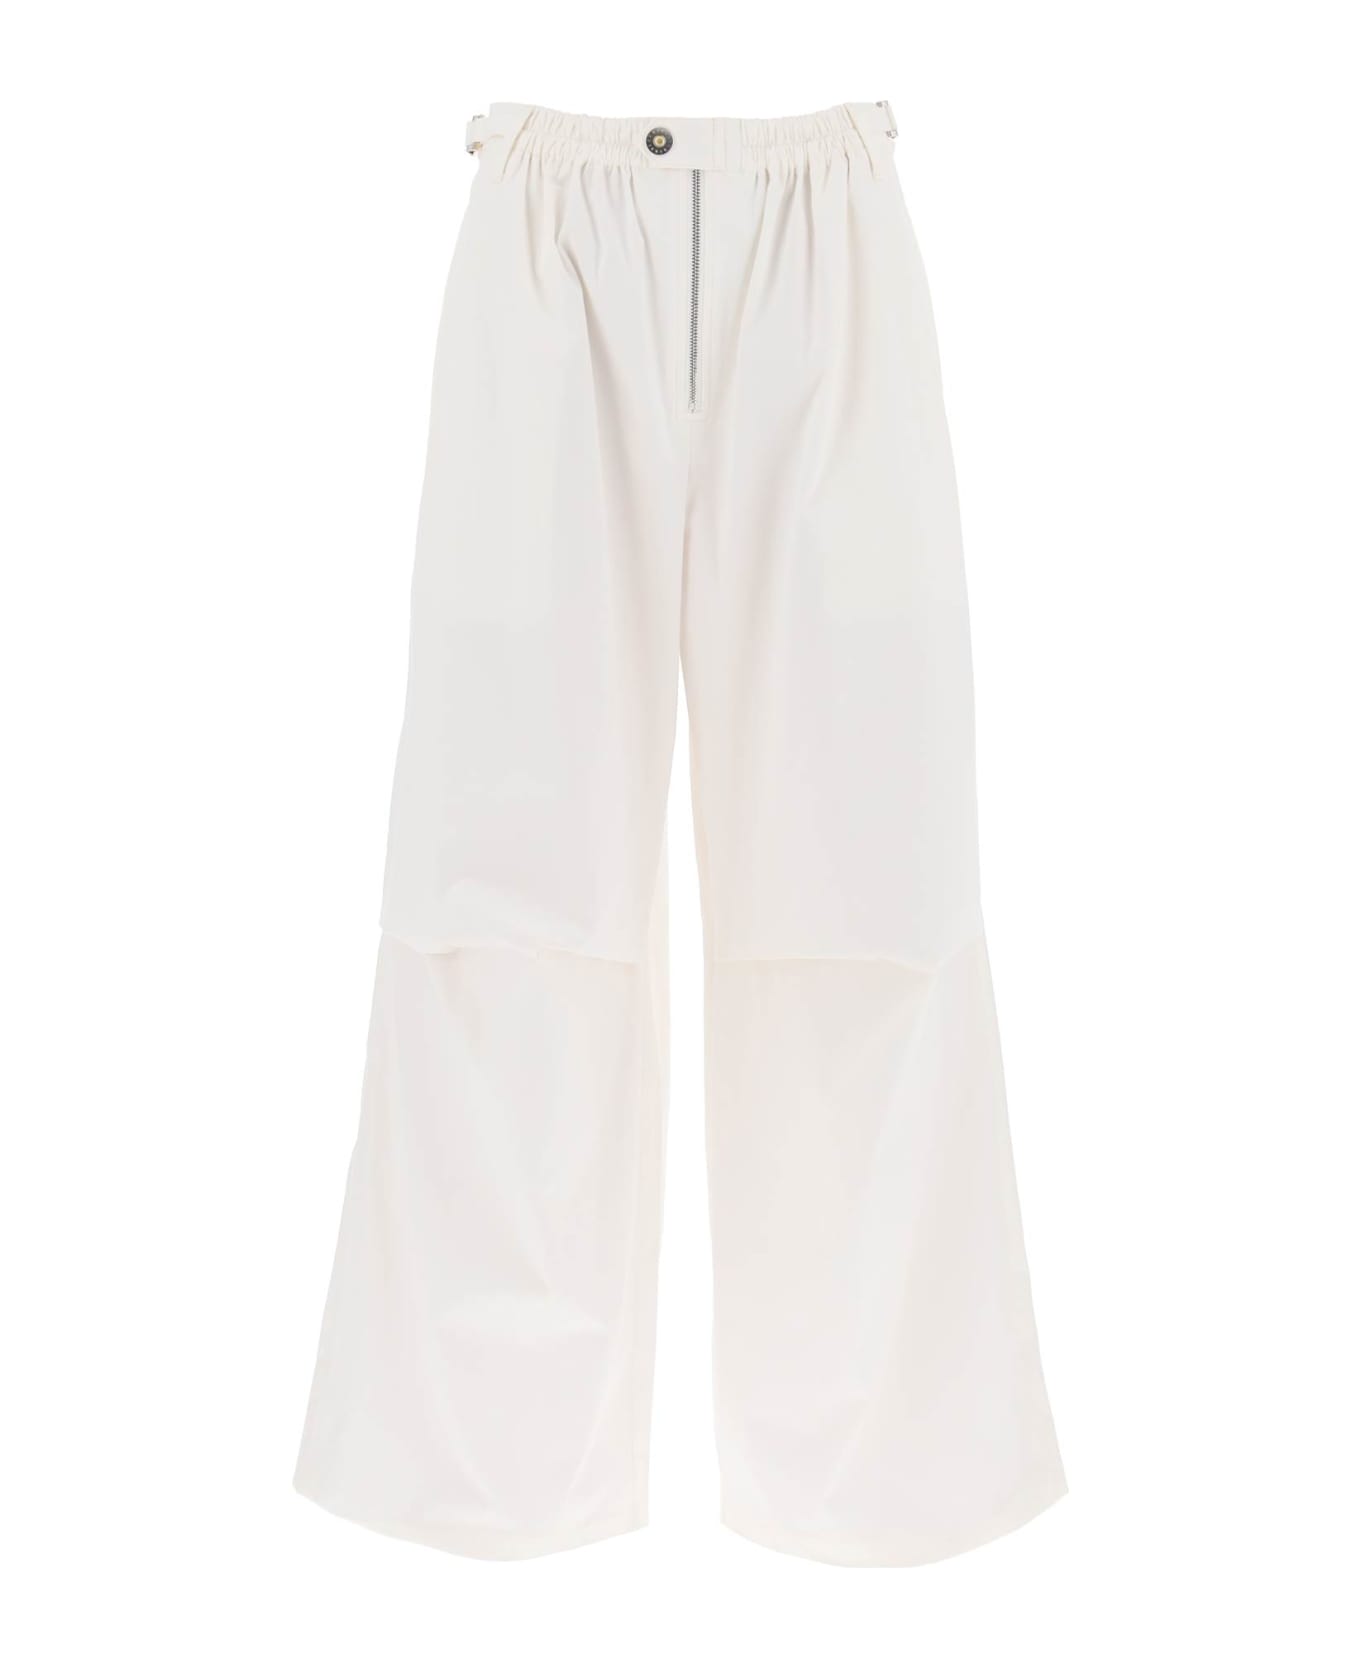 Dion Lee Oversized Parachute Pants - IVORY (White) ボトムス